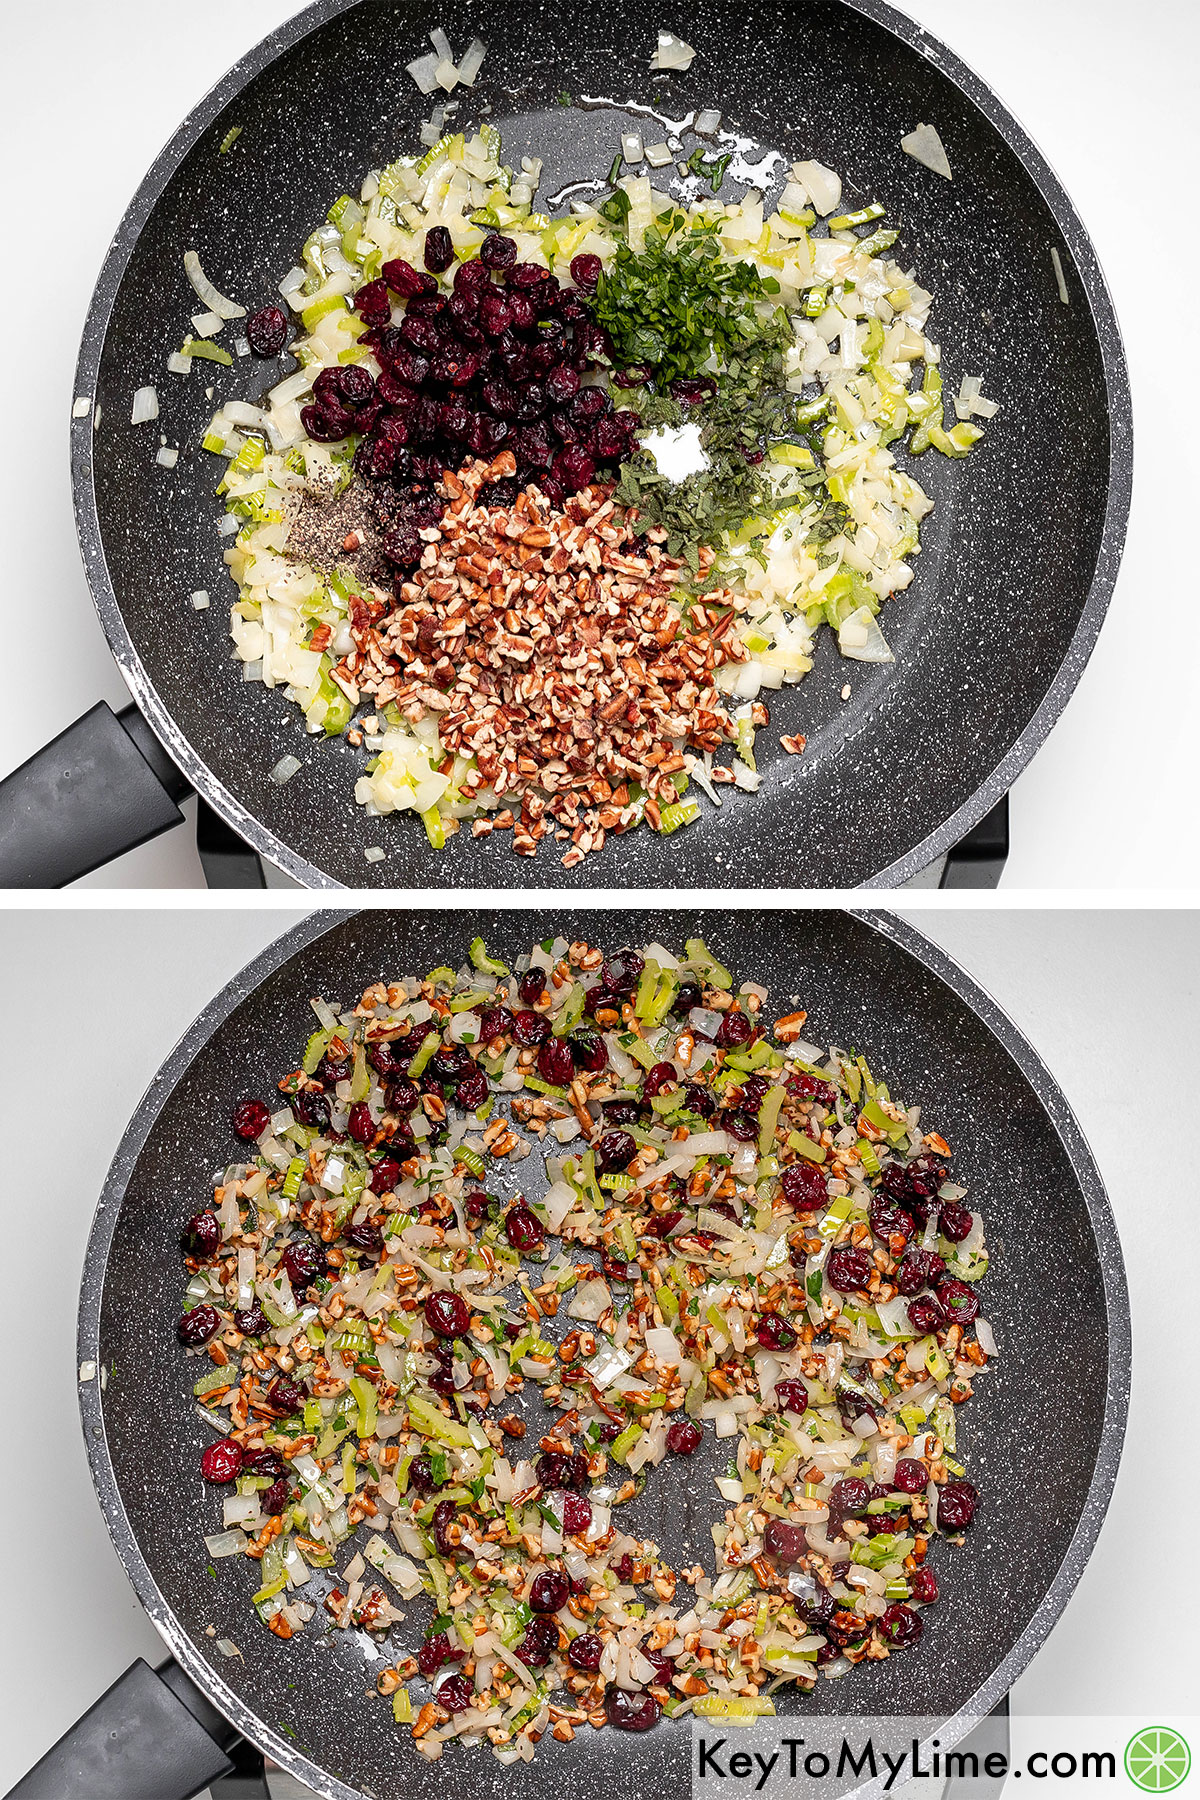 Sauteing the vegetables in a hot skillet then adding cranberries, pecans, and fresh herbs to the pan.